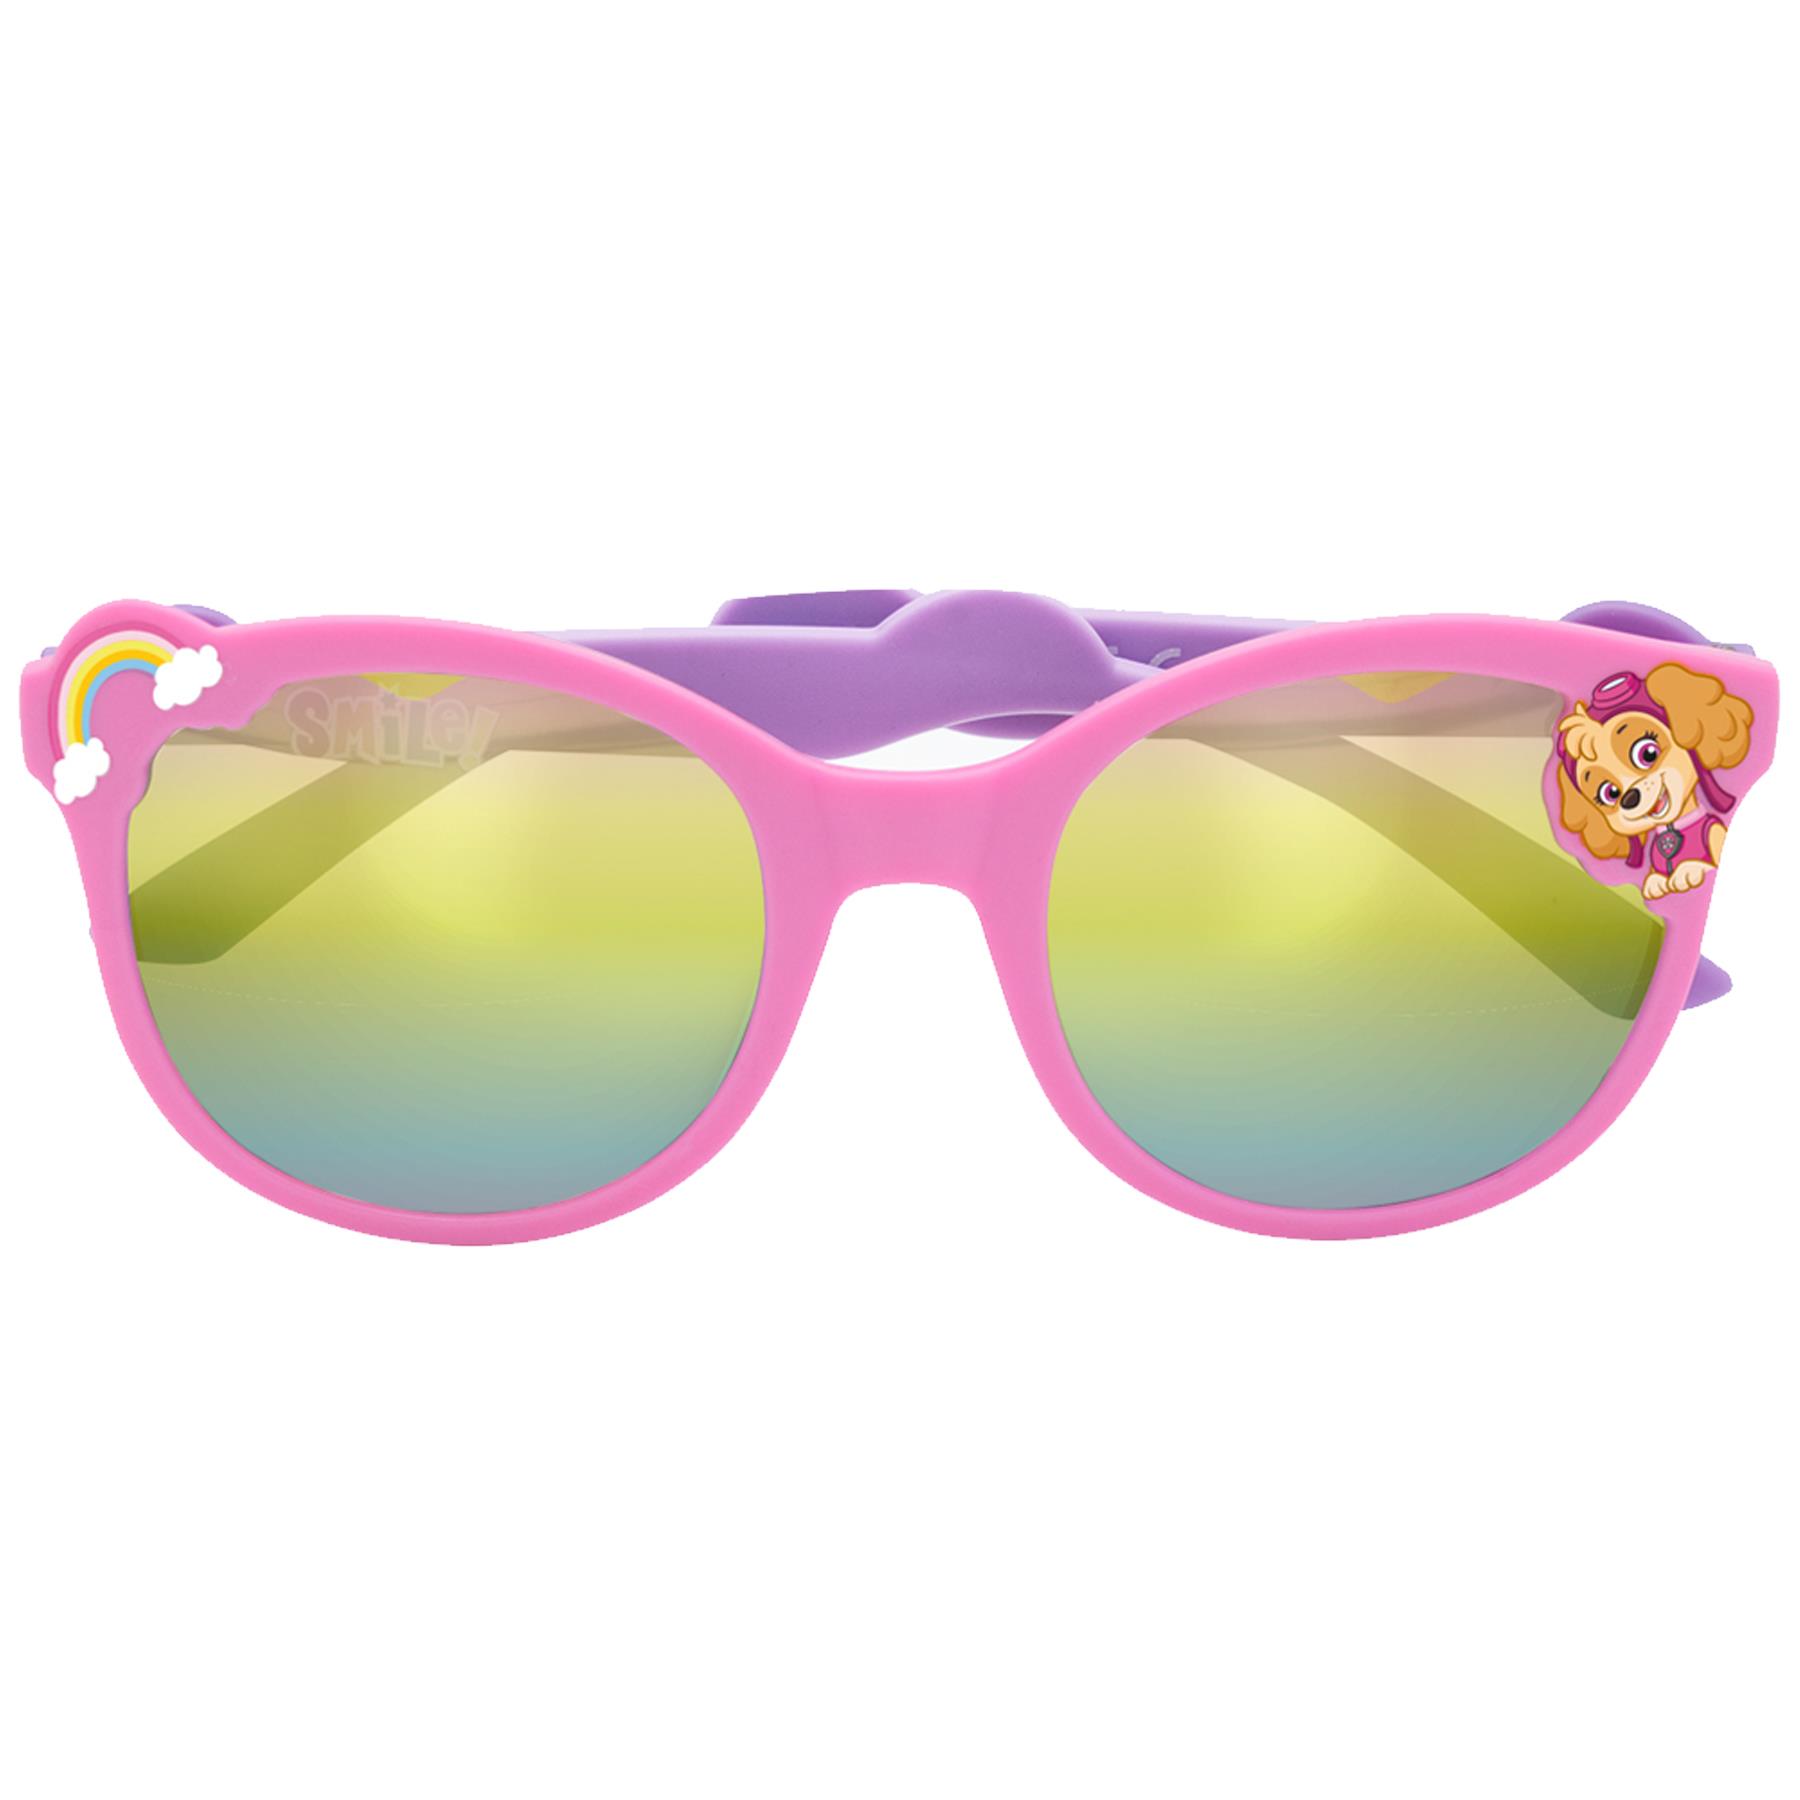 Paw Patrol Skye and Everest Children's Sunglasses UV protection for Holiday - PAW15